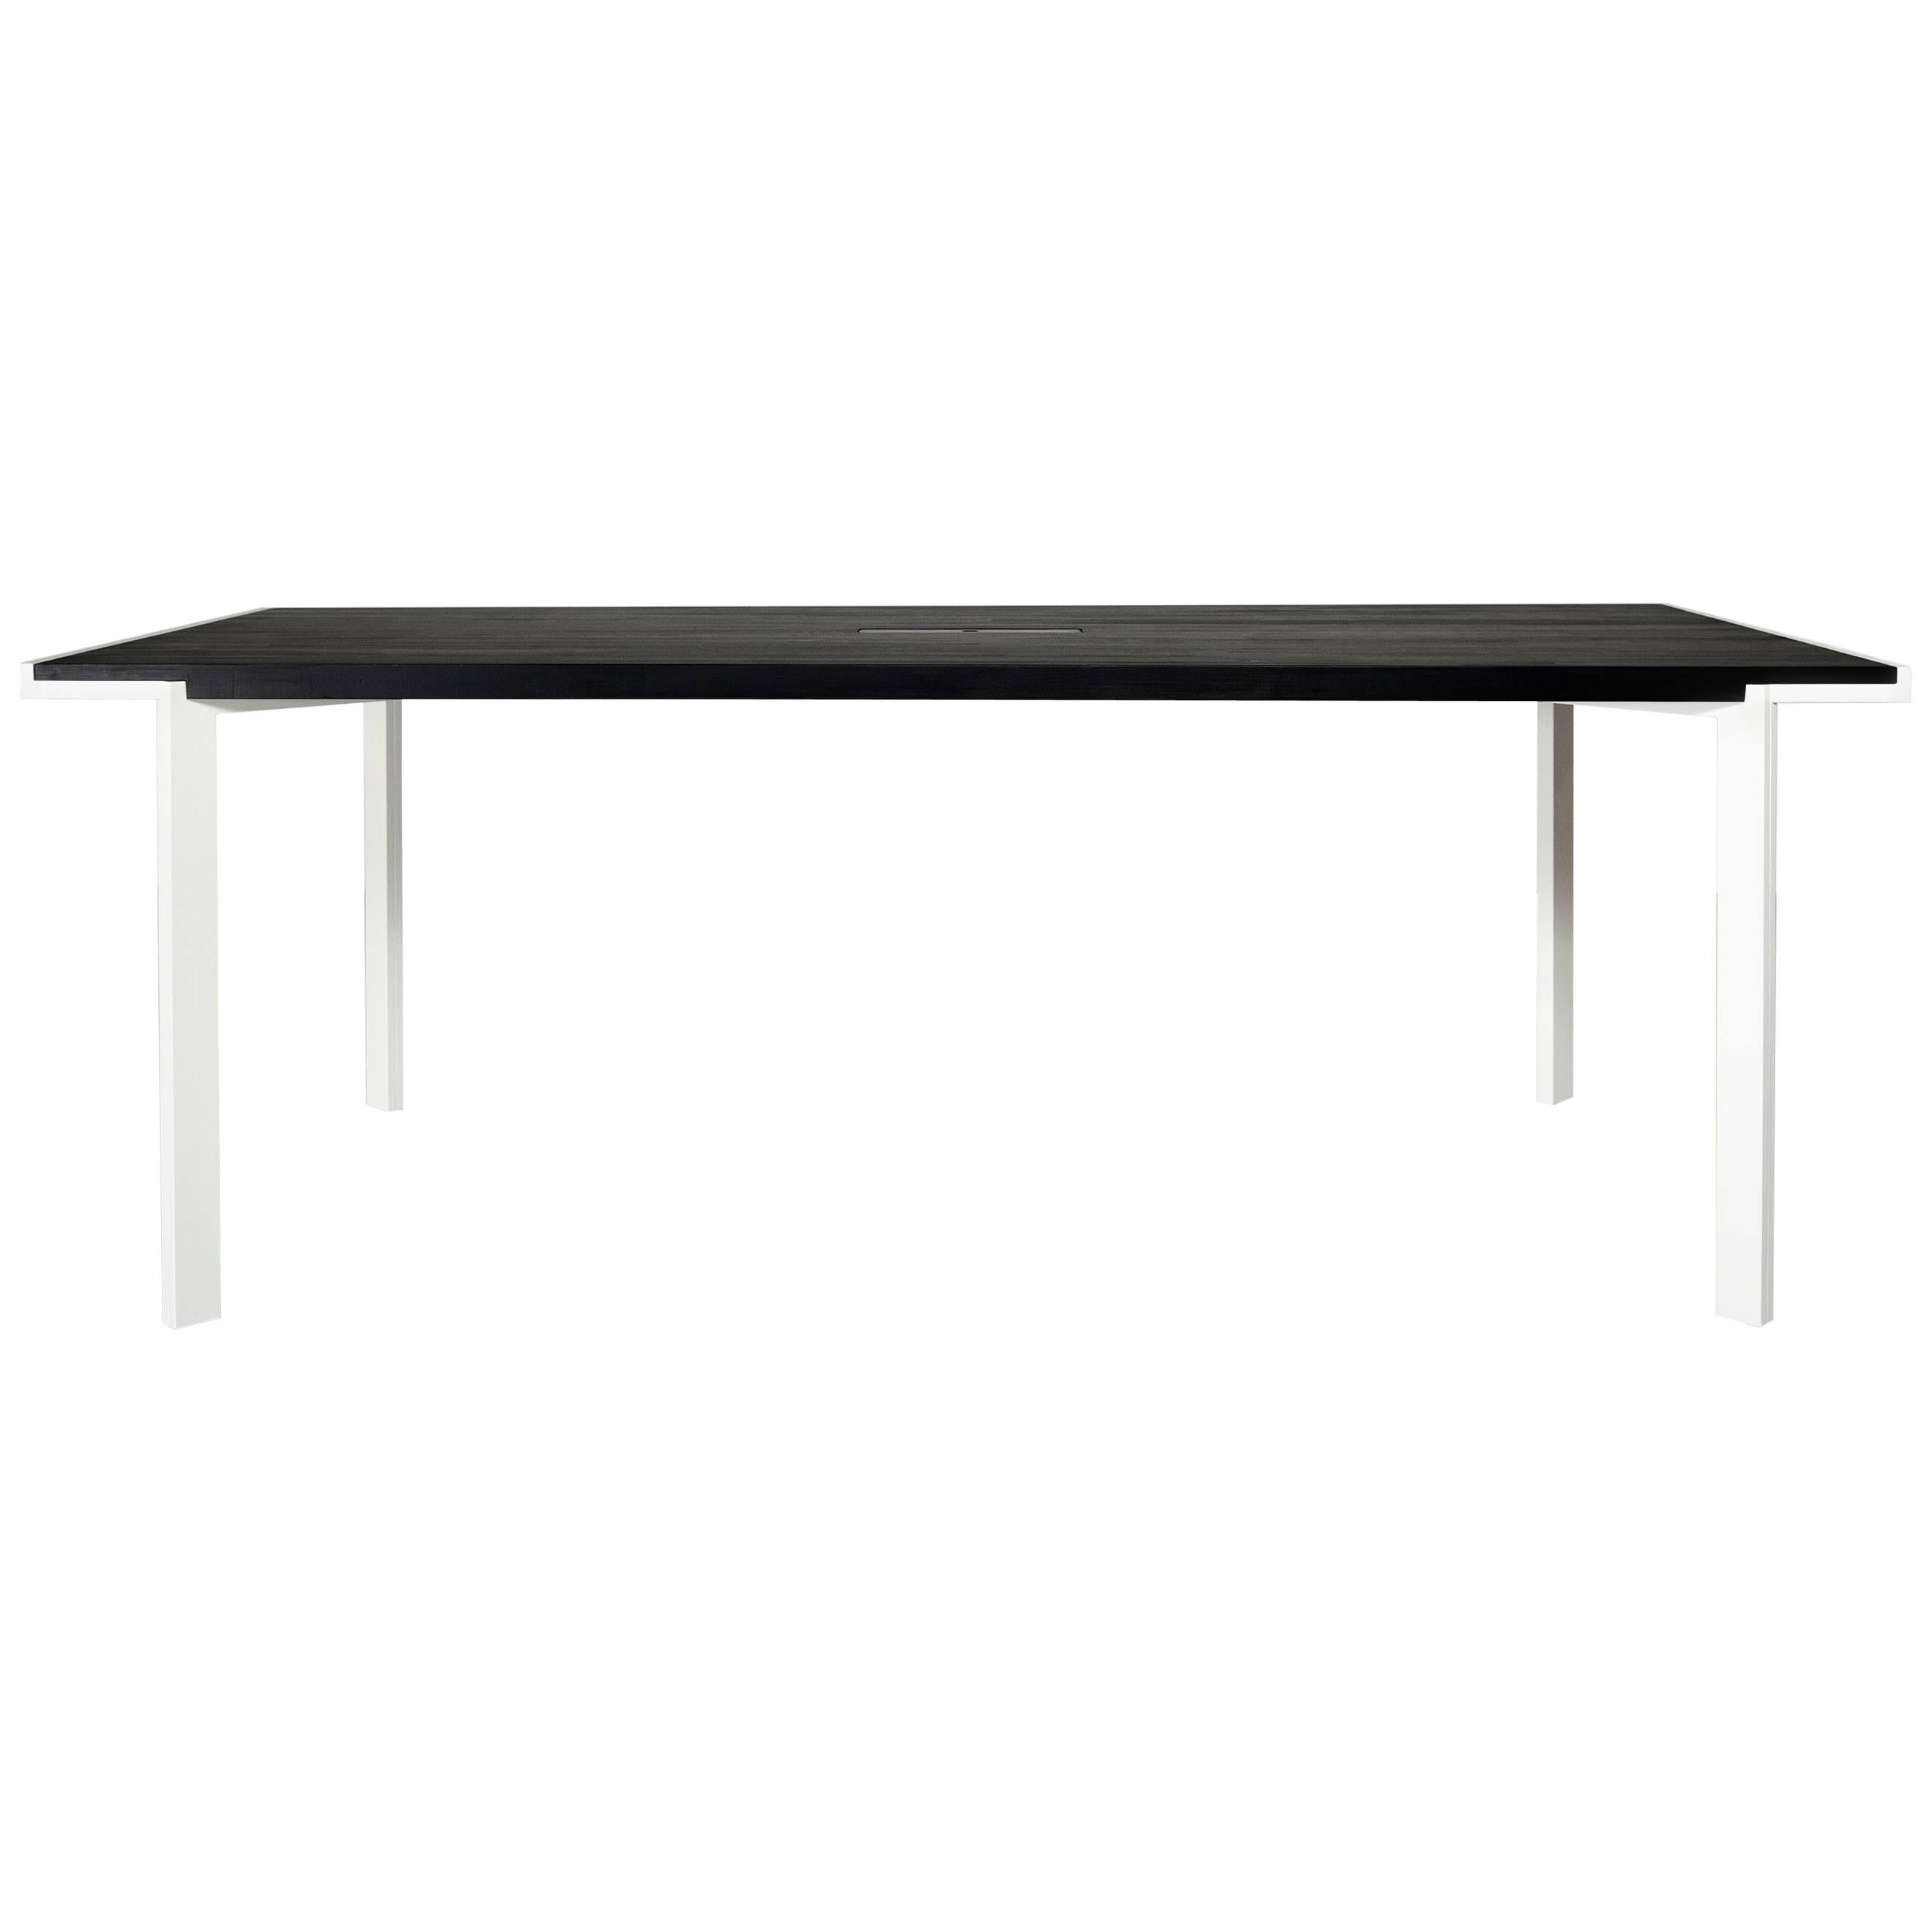 Trace Table in Contemporary White Powder-Coated Steel and Ebonized Maple